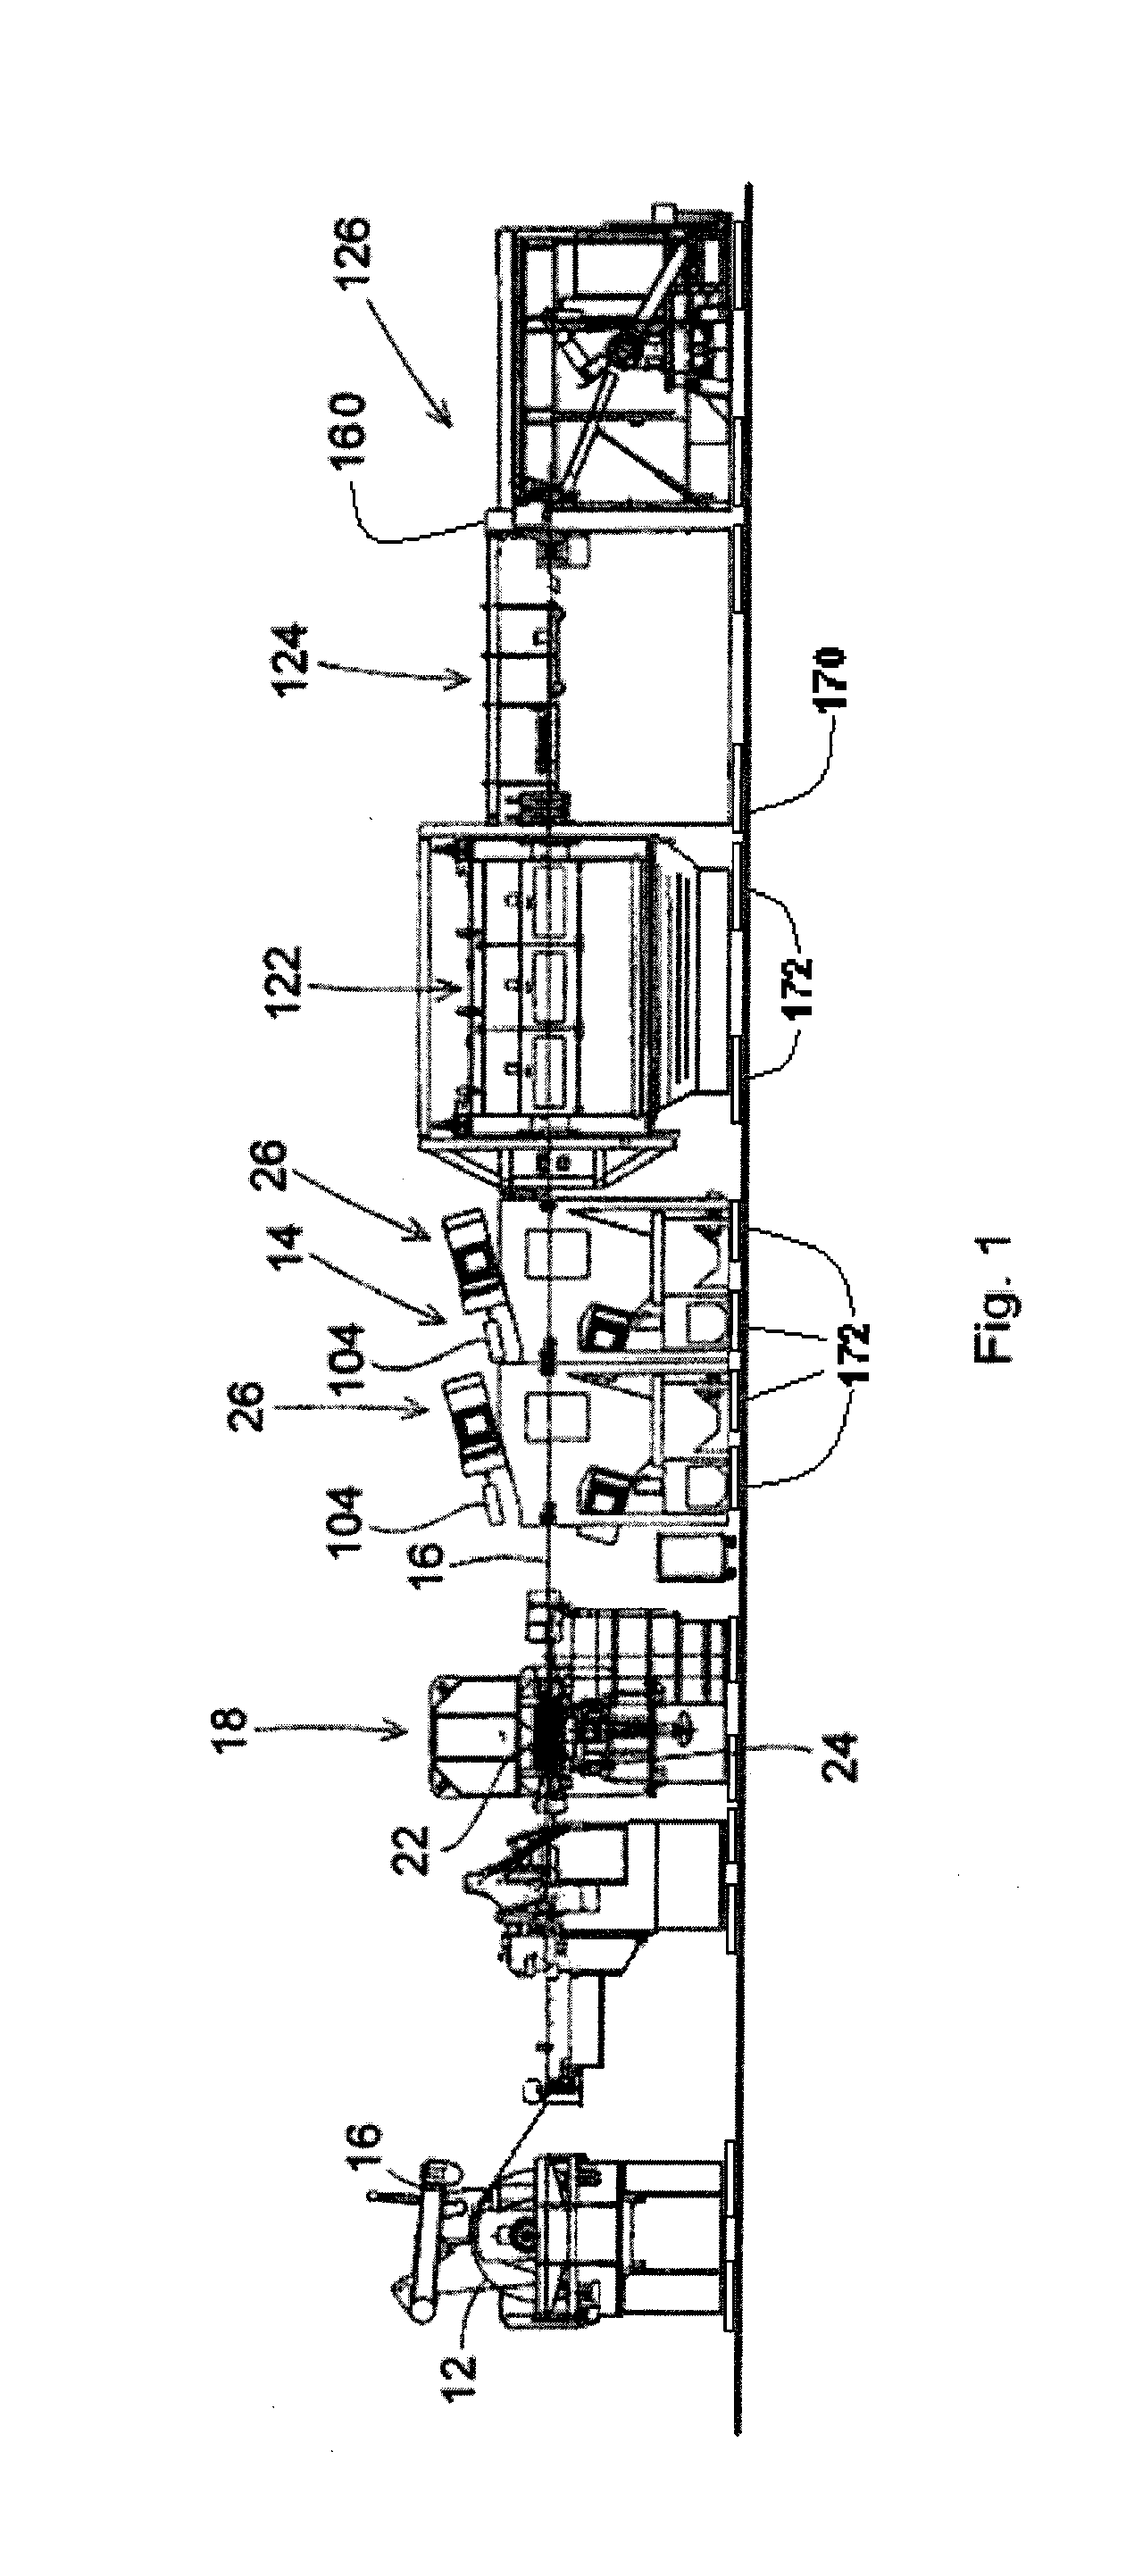 Method of Producing Rust Inhibitive Sheet Metal Through Scale Removal with a Slurry Blasting Descaling Cell Having Improved Grit Flow